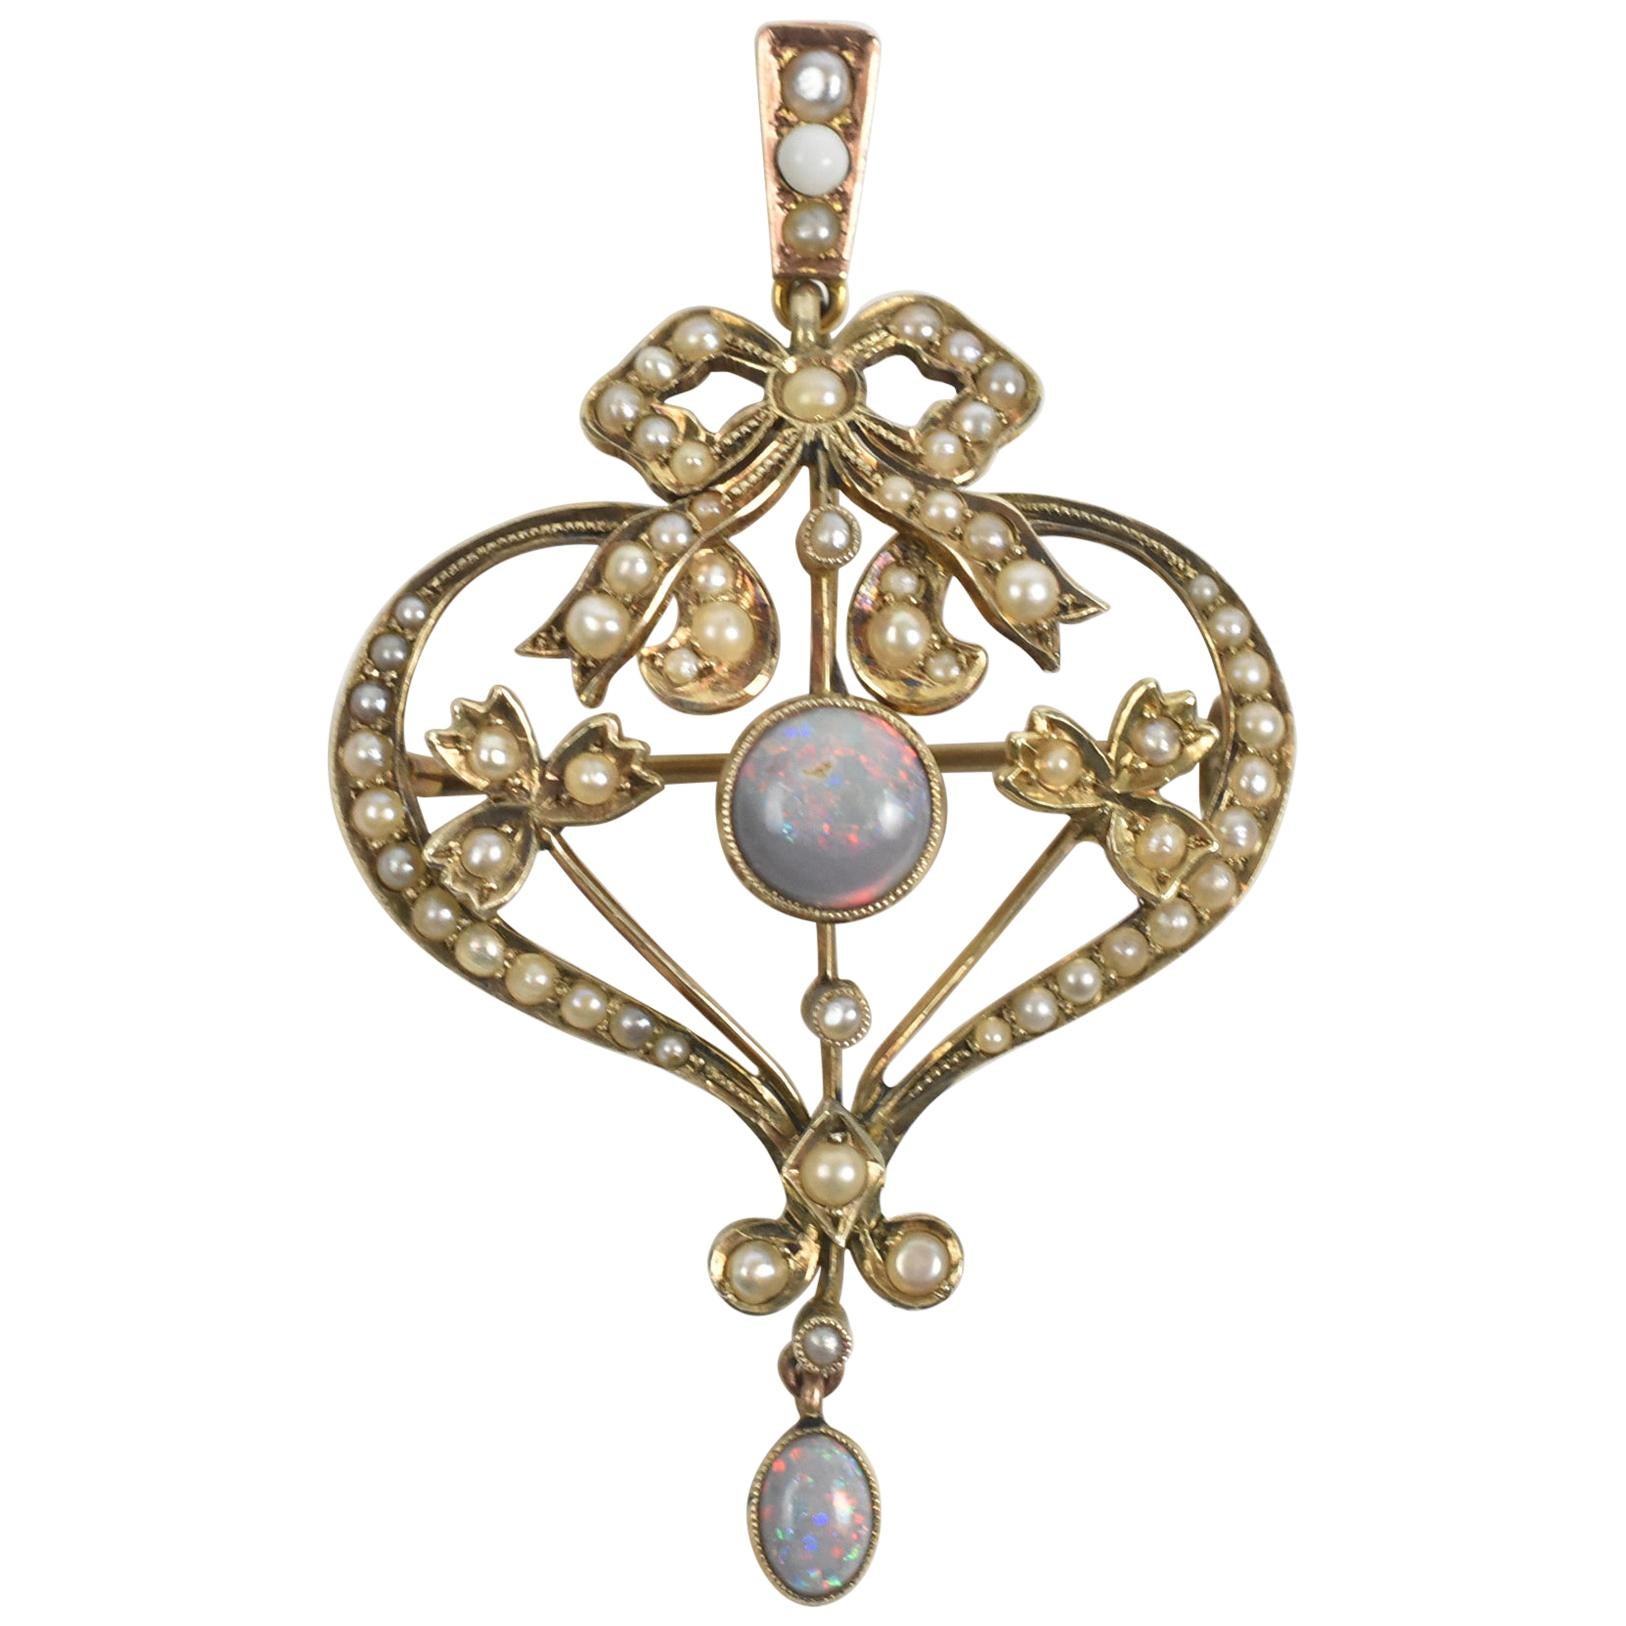 9-Karat Gold Edwardian Brooch or Pendant with Opals and Seed Pearl Accents